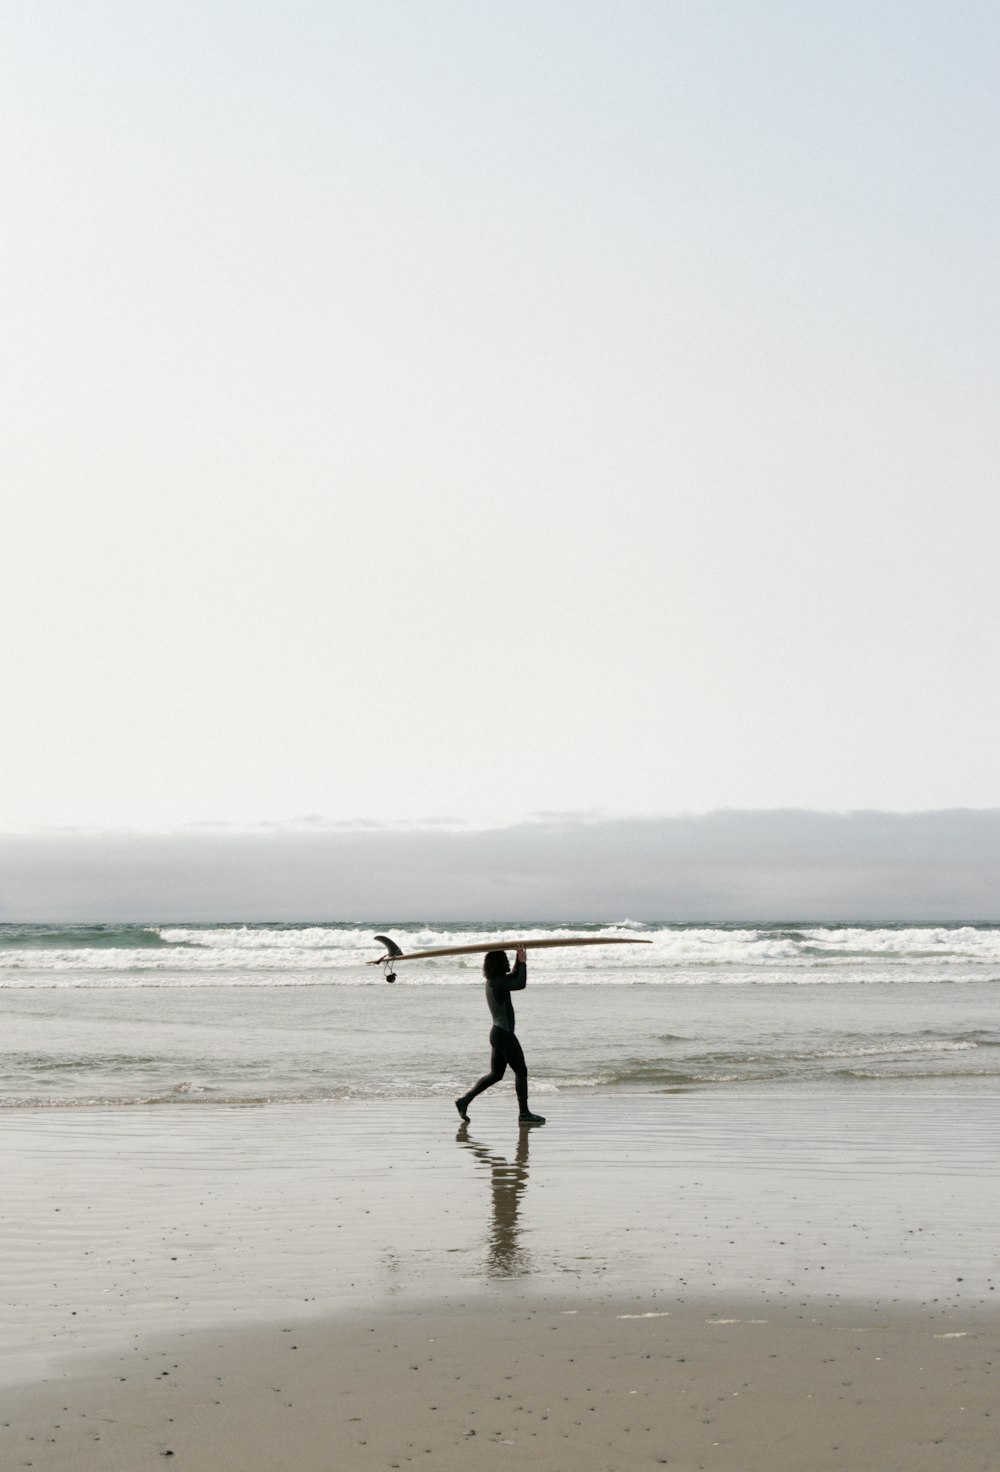 person holding surfboard walking on beach during daytime